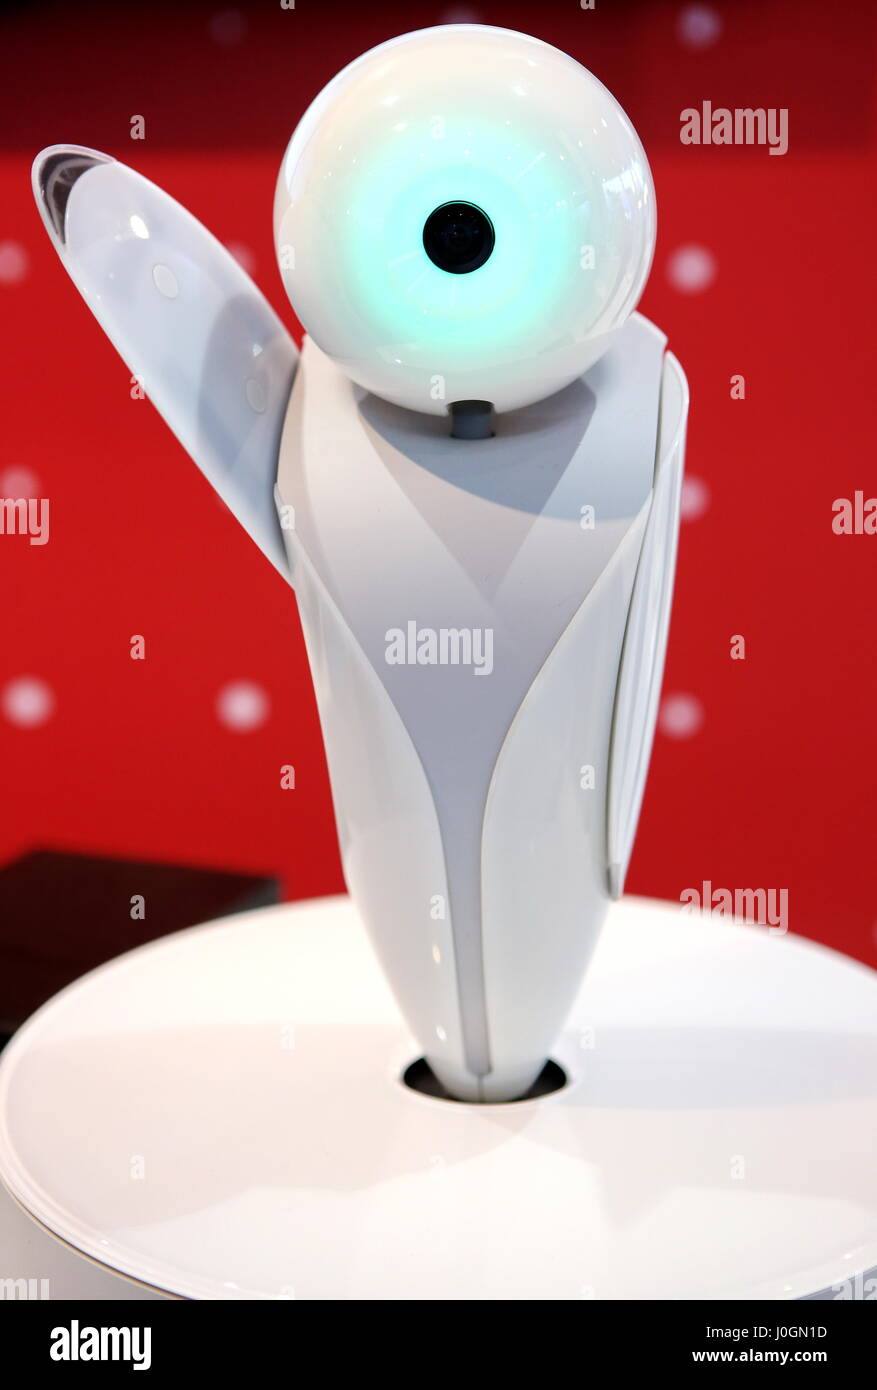 Hanover, Germany. 19th March, 2017. 'RoboPin', talking mediator-robot by Fujitsu with artificial intelligence, e.g. usable in hotels. CeBIT 2017, ICT trade fair, lead theme 'd!conomy - no limits'. Photocredit: Christian Lademann Stock Photo